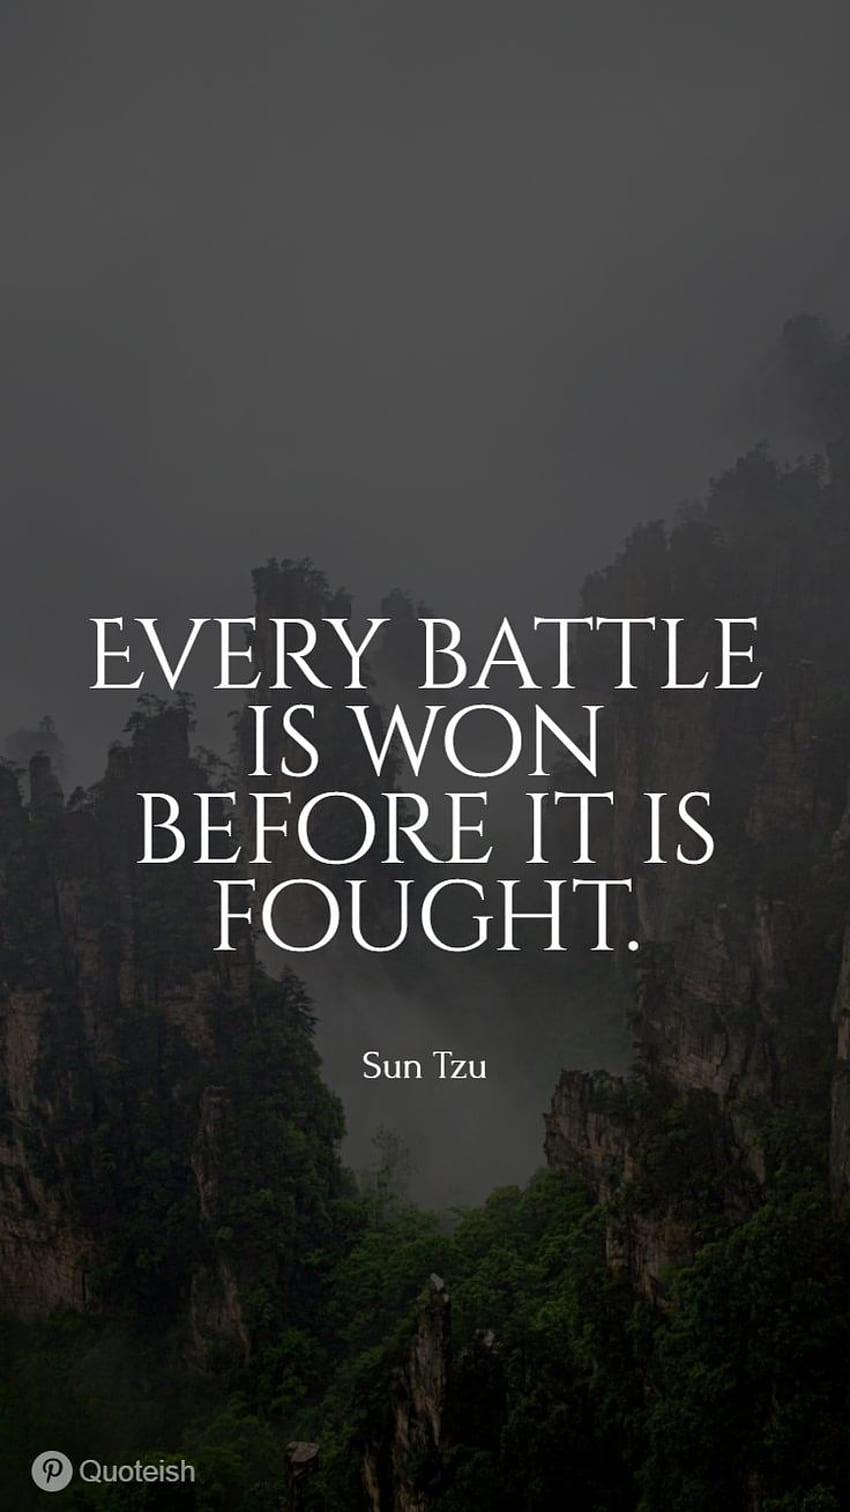 Battle Quotes & Sayings. Battle quotes, Strategy quotes, Life choices quotes, Sun Tzu HD phone wallpaper